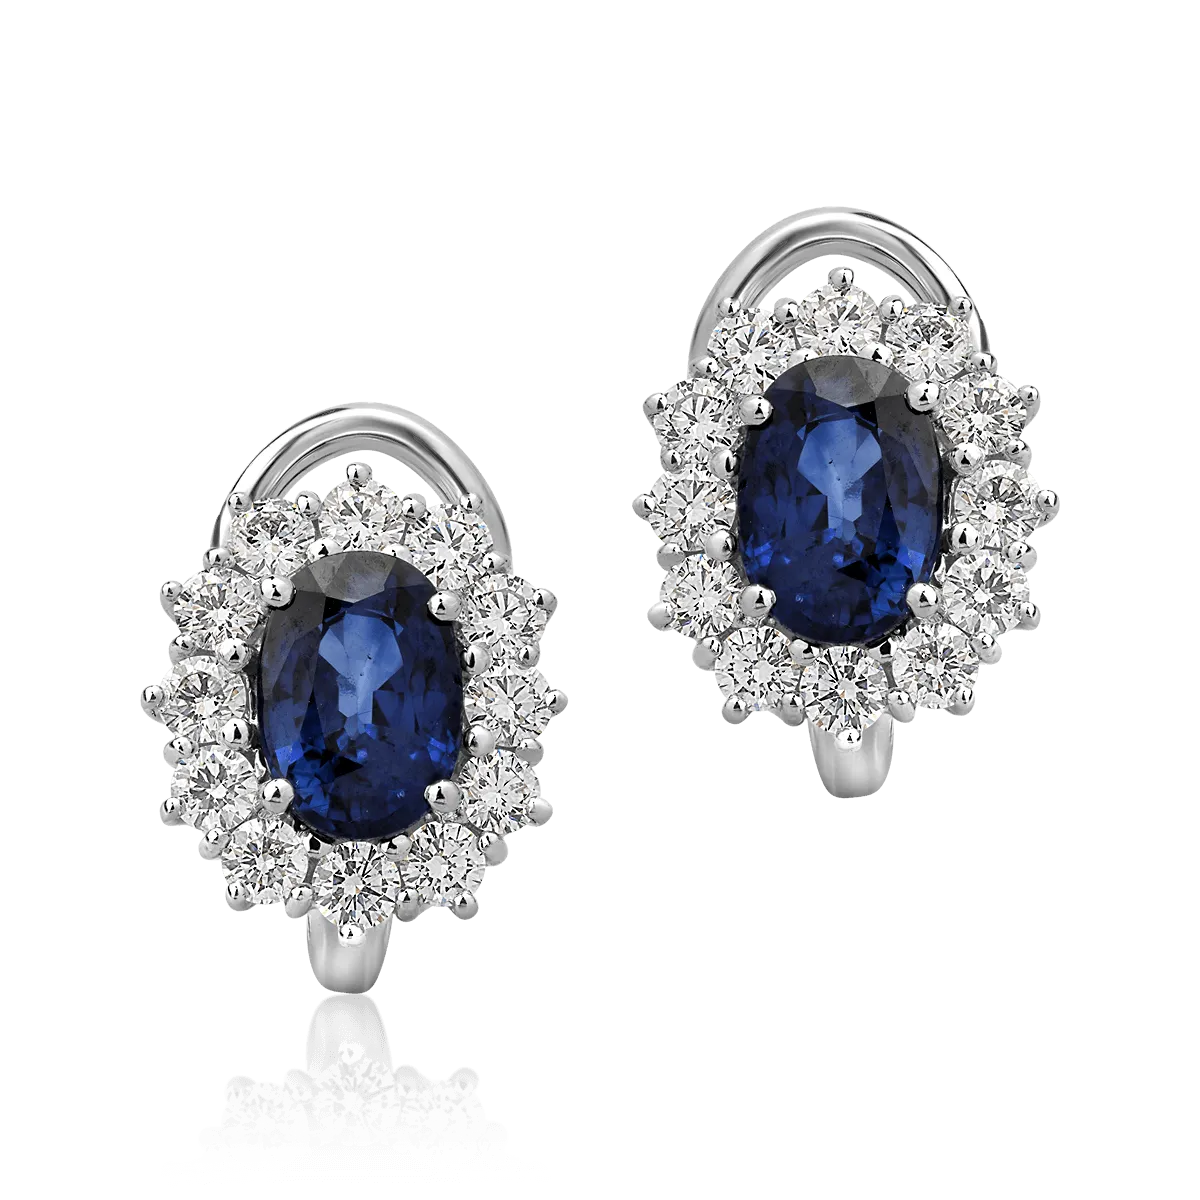 18K white gold earrings with 2ct sapphires and 0.92ct diamonds